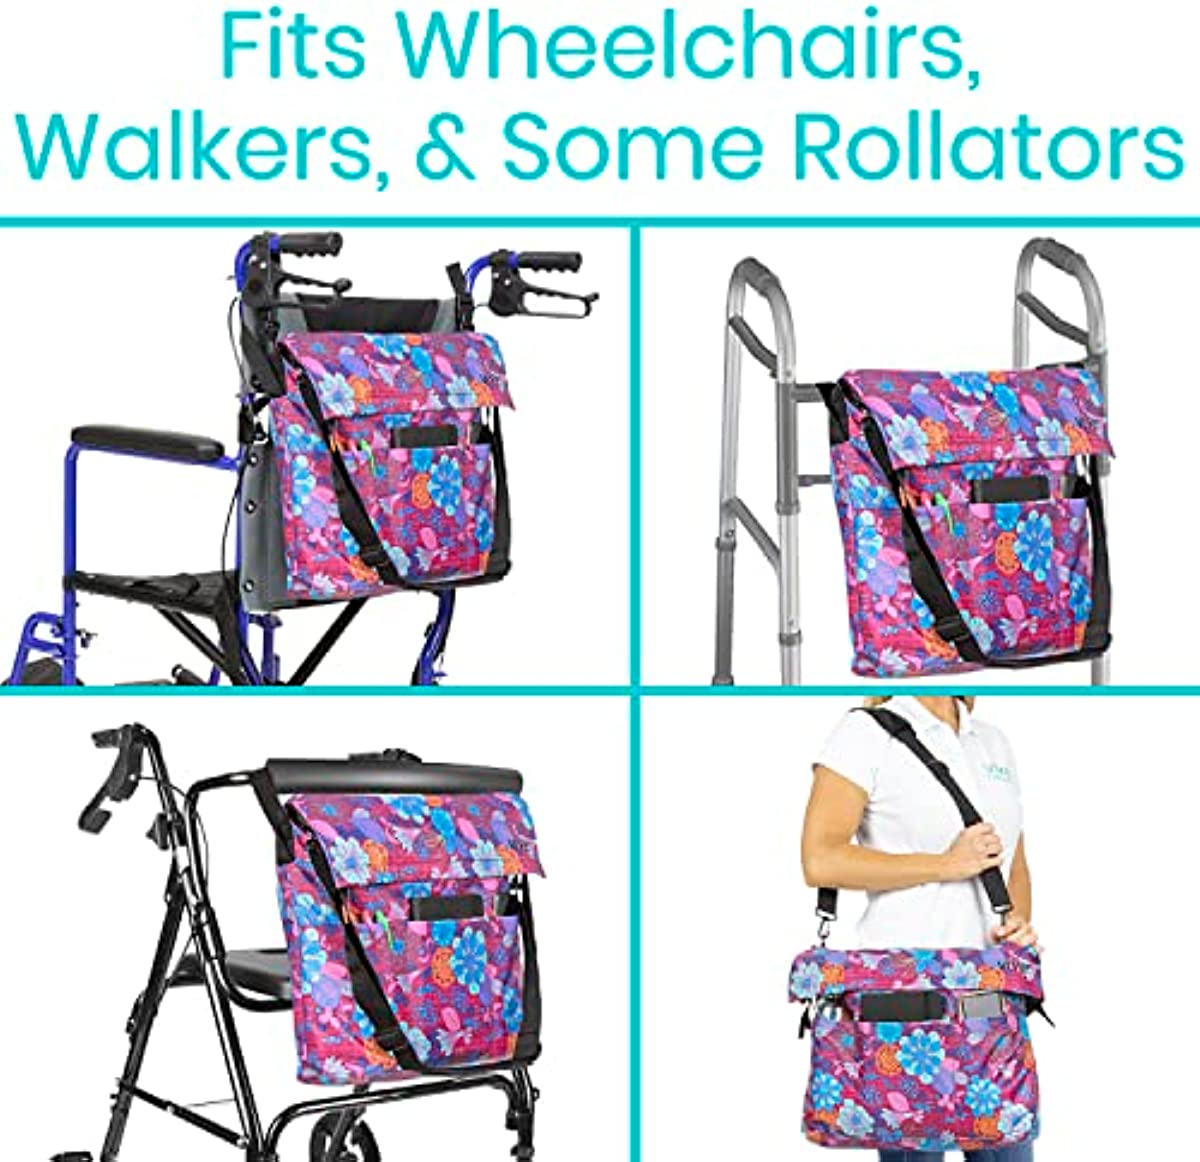 Vive Wheelchair Bag - Electric Wheel Chair Walker Accessories Pouch for Adults, Seniors, 15 Colors - Large Tote Accessory to Hang on Back, Power Transport Storage Travel Backpack for Men, Women